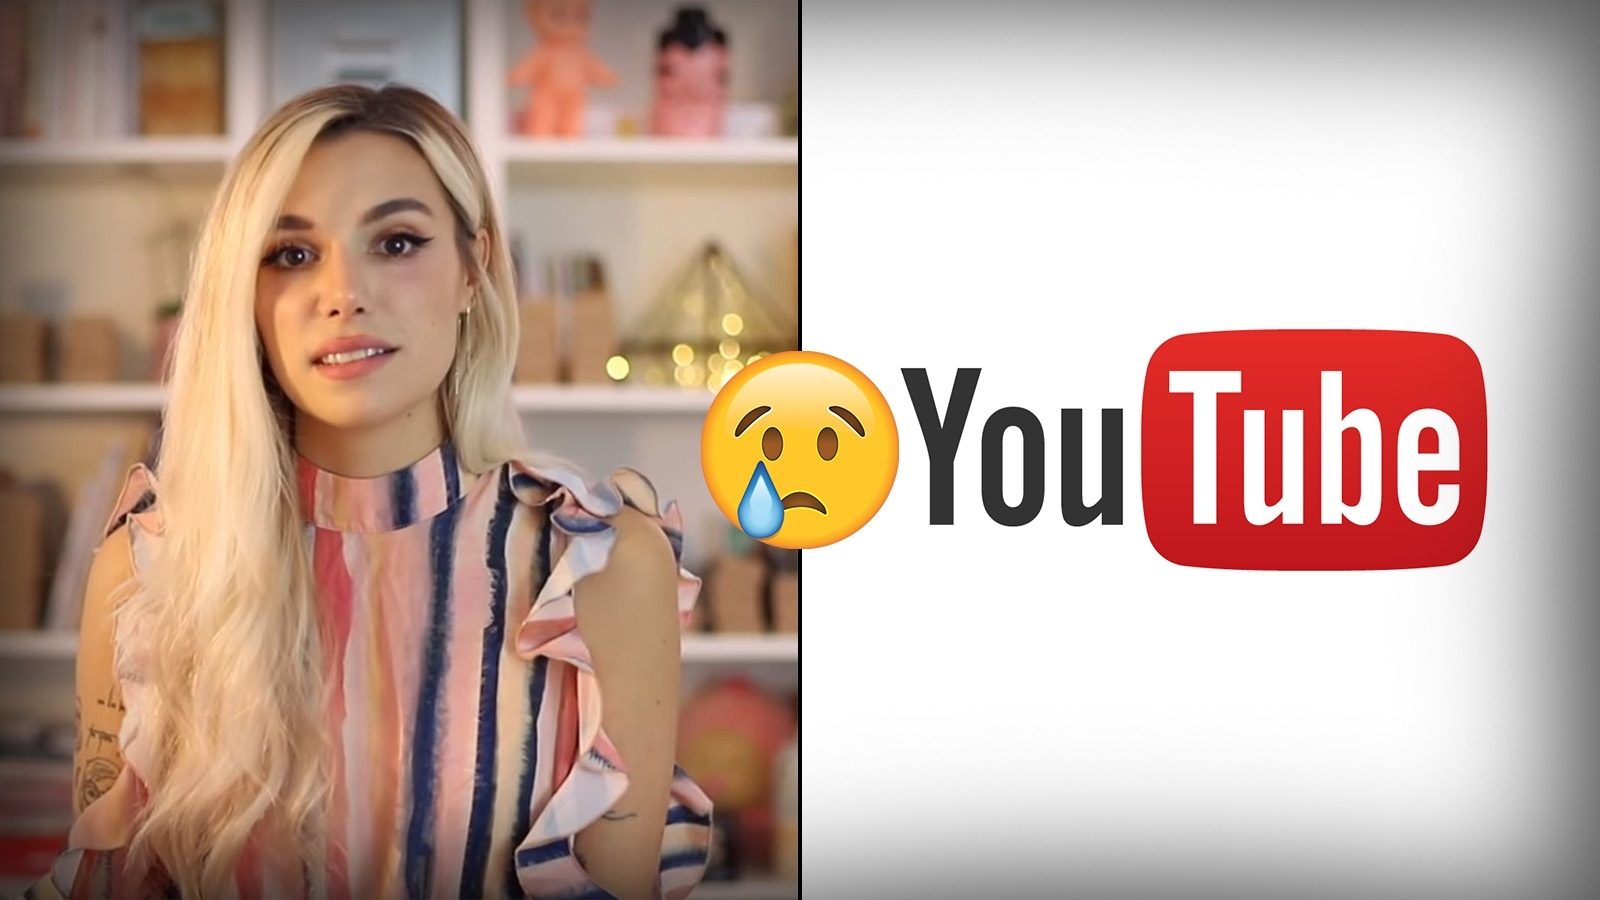 Skynd dig aldrig Forfalske PewDiePie's fiance Marzia quits YouTube after seven years - Dexerto